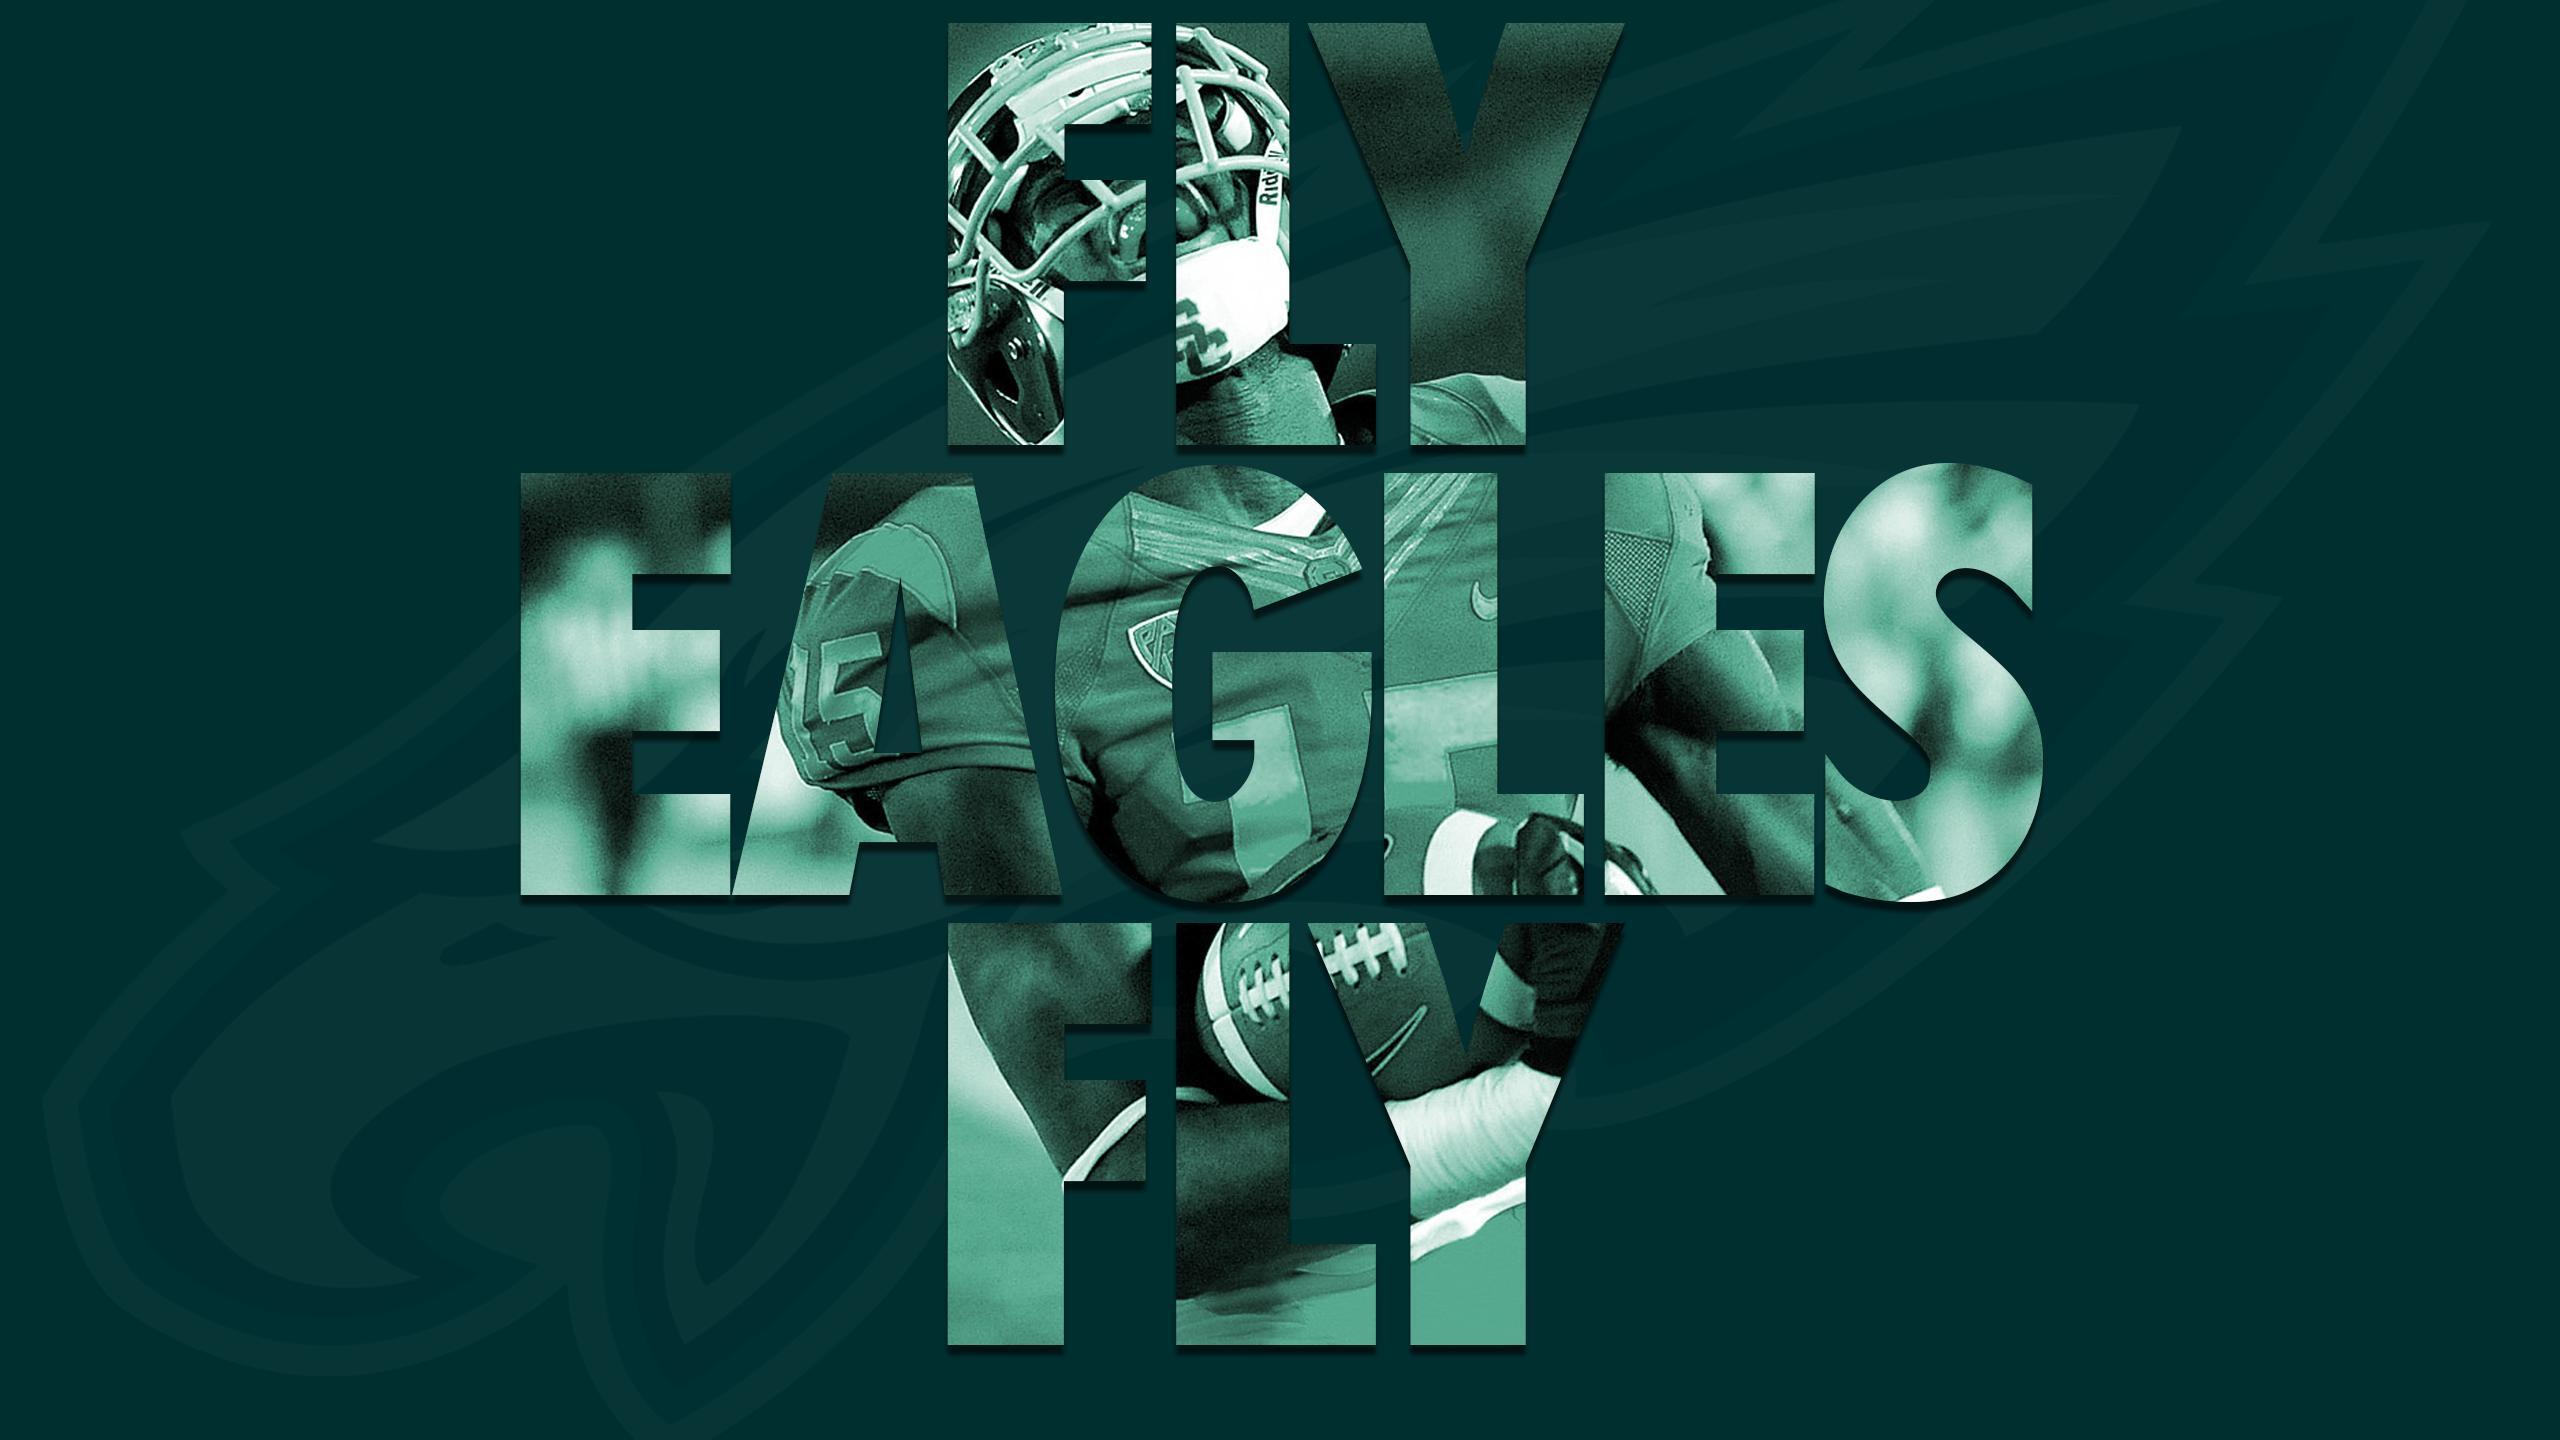 Eagles "Nike" Wallpaper Rookie Edition